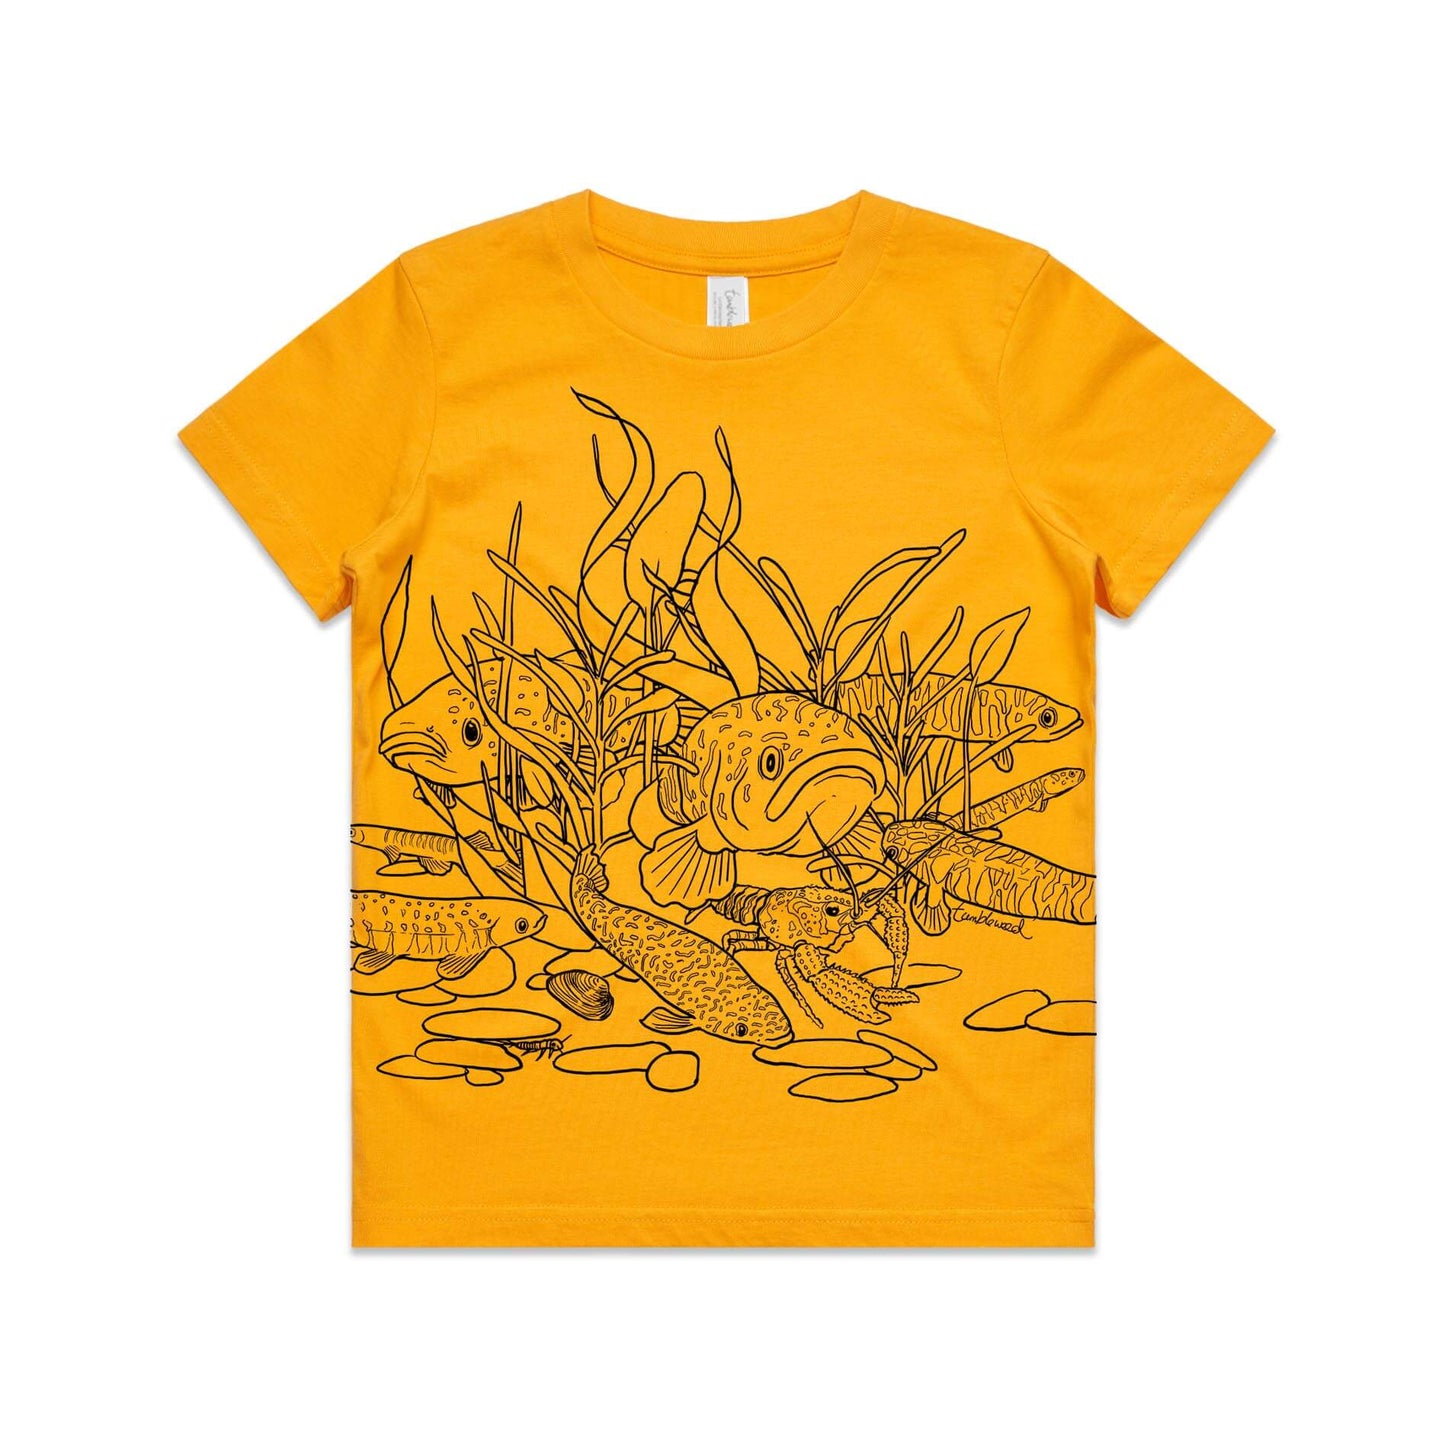 Gold, cotton kids' t-shirt with screen printed freshwater fish design.